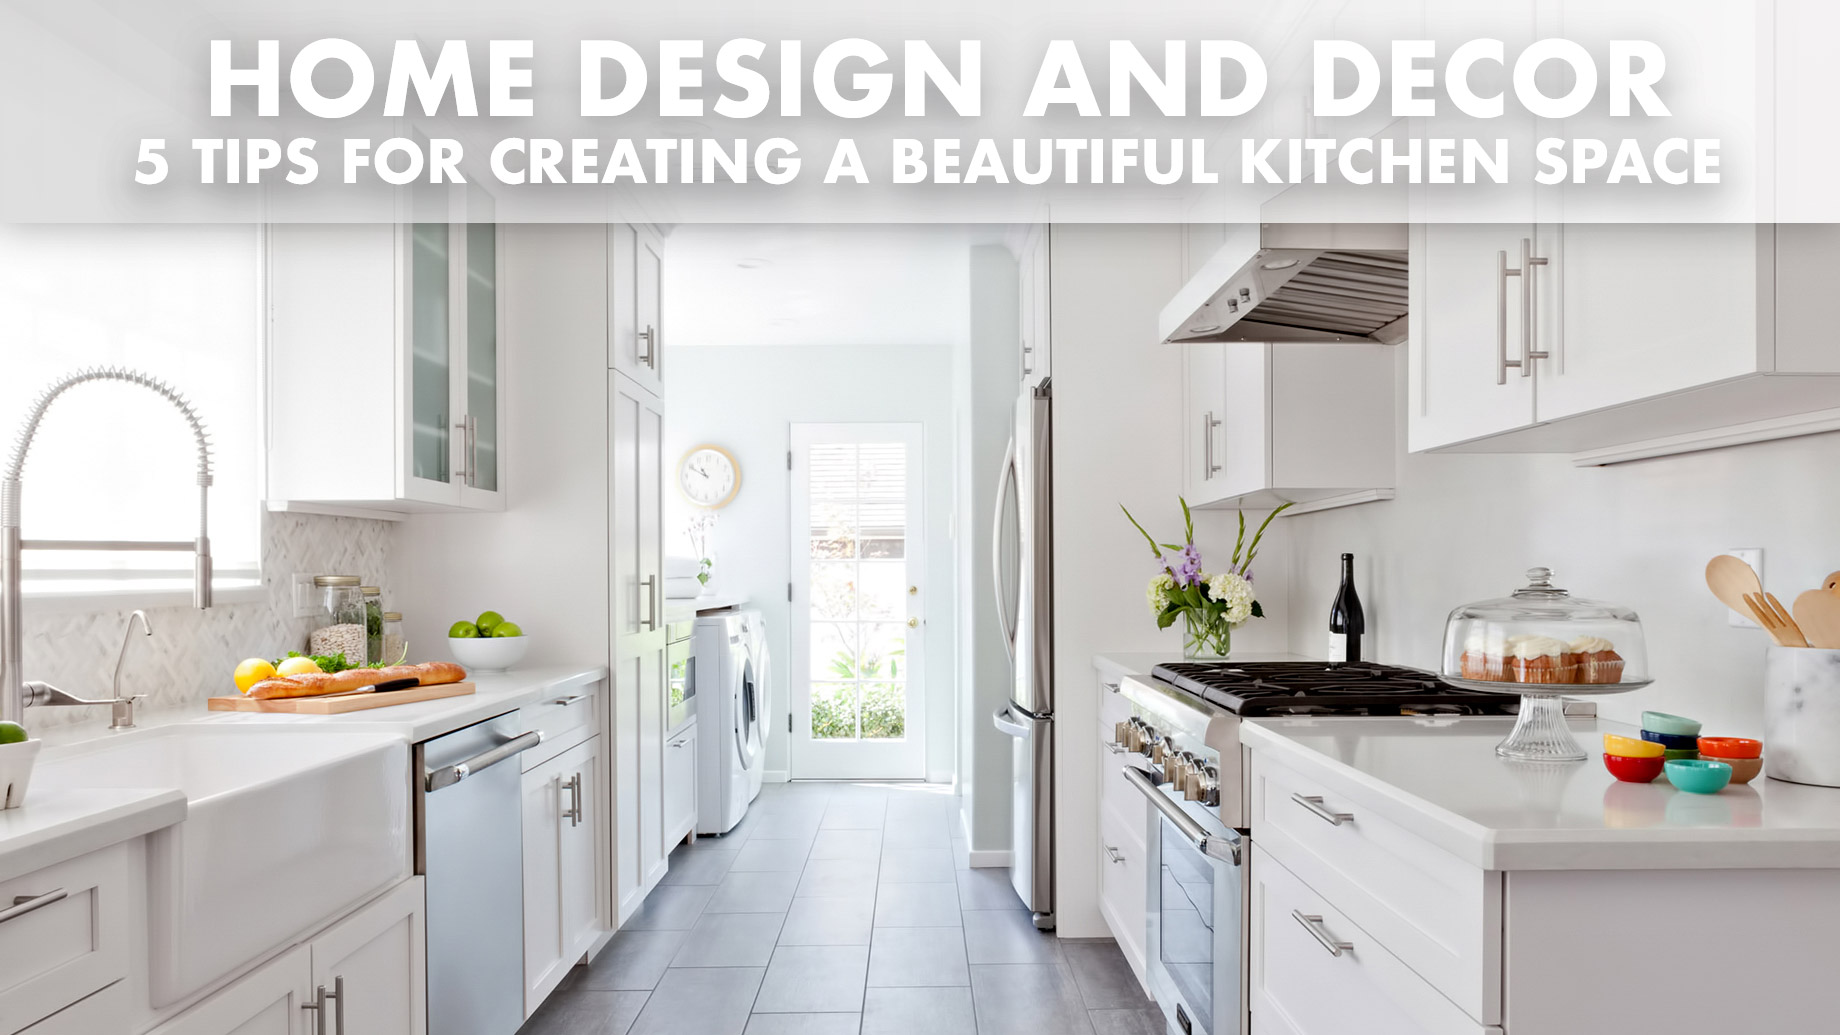 Home Design and Decor - 5 Tips for Creating a Beautiful Kitchen Space